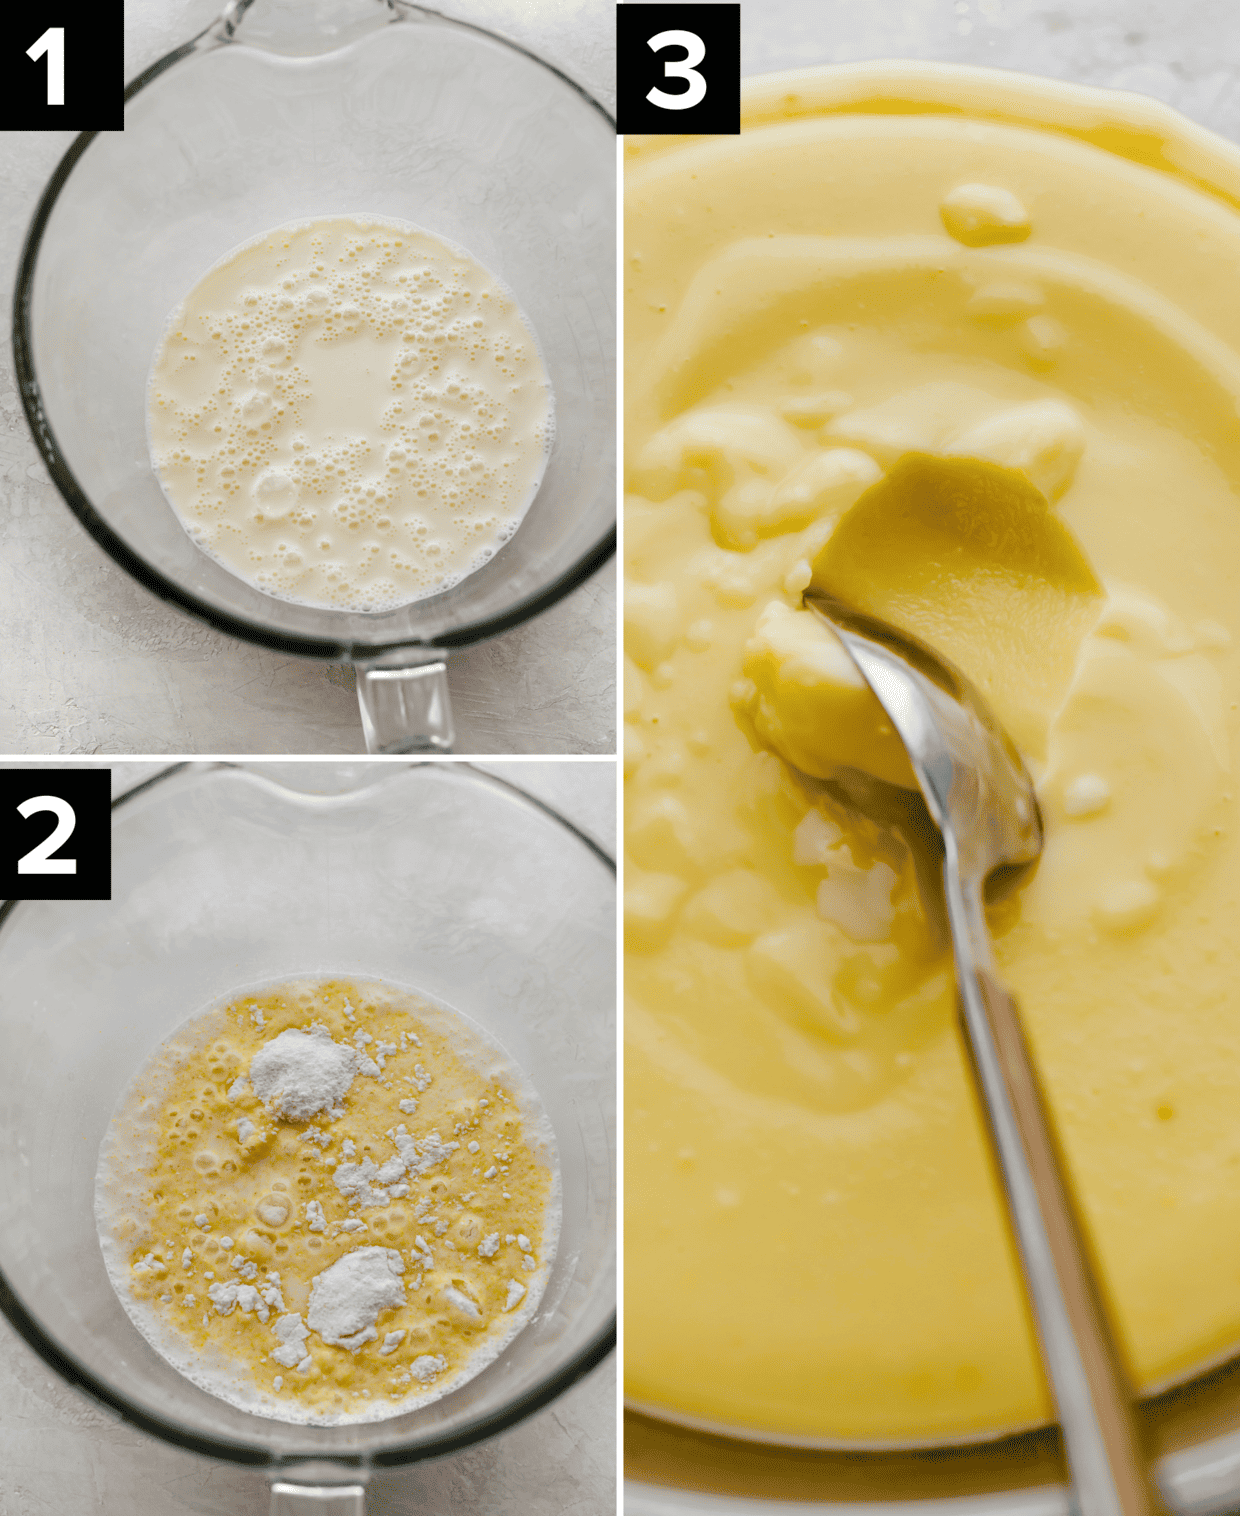 Three images showing how to make Magnolia Bakery Banana Pudding, top left is white mixture in glass bowl, bottom left is yellow liquid mixture in glass bowl, right image is hardened yellow pudding in glass bowl.